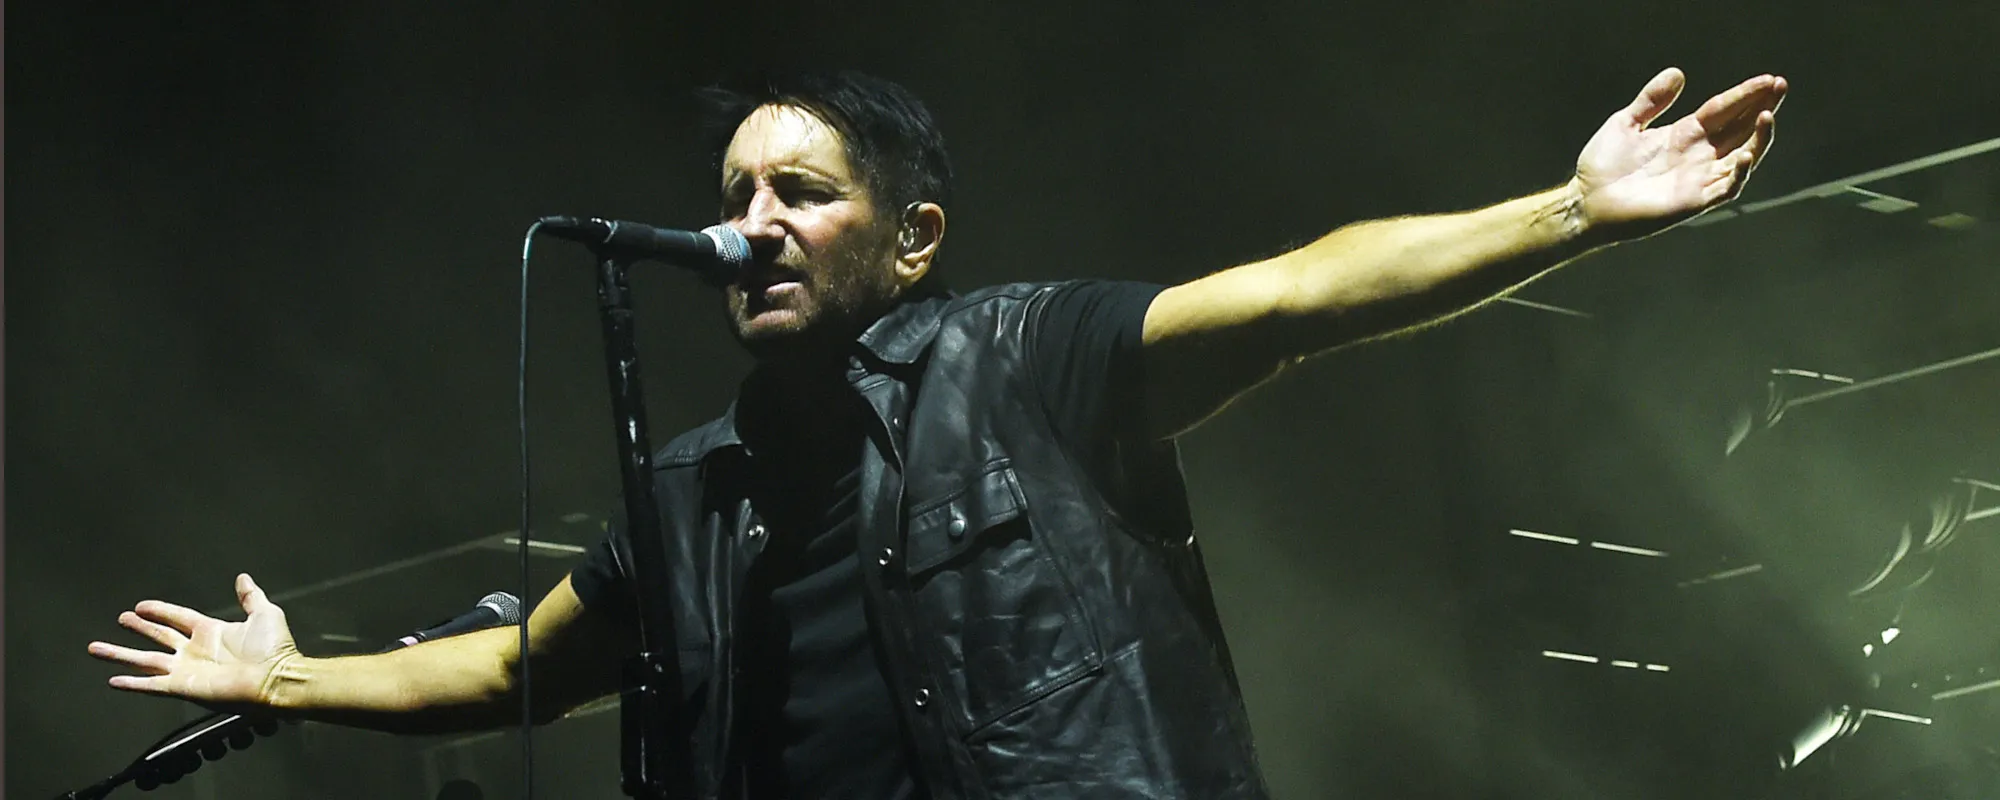 Behind the Band Name: Nine Inch Nails - American Songwriter